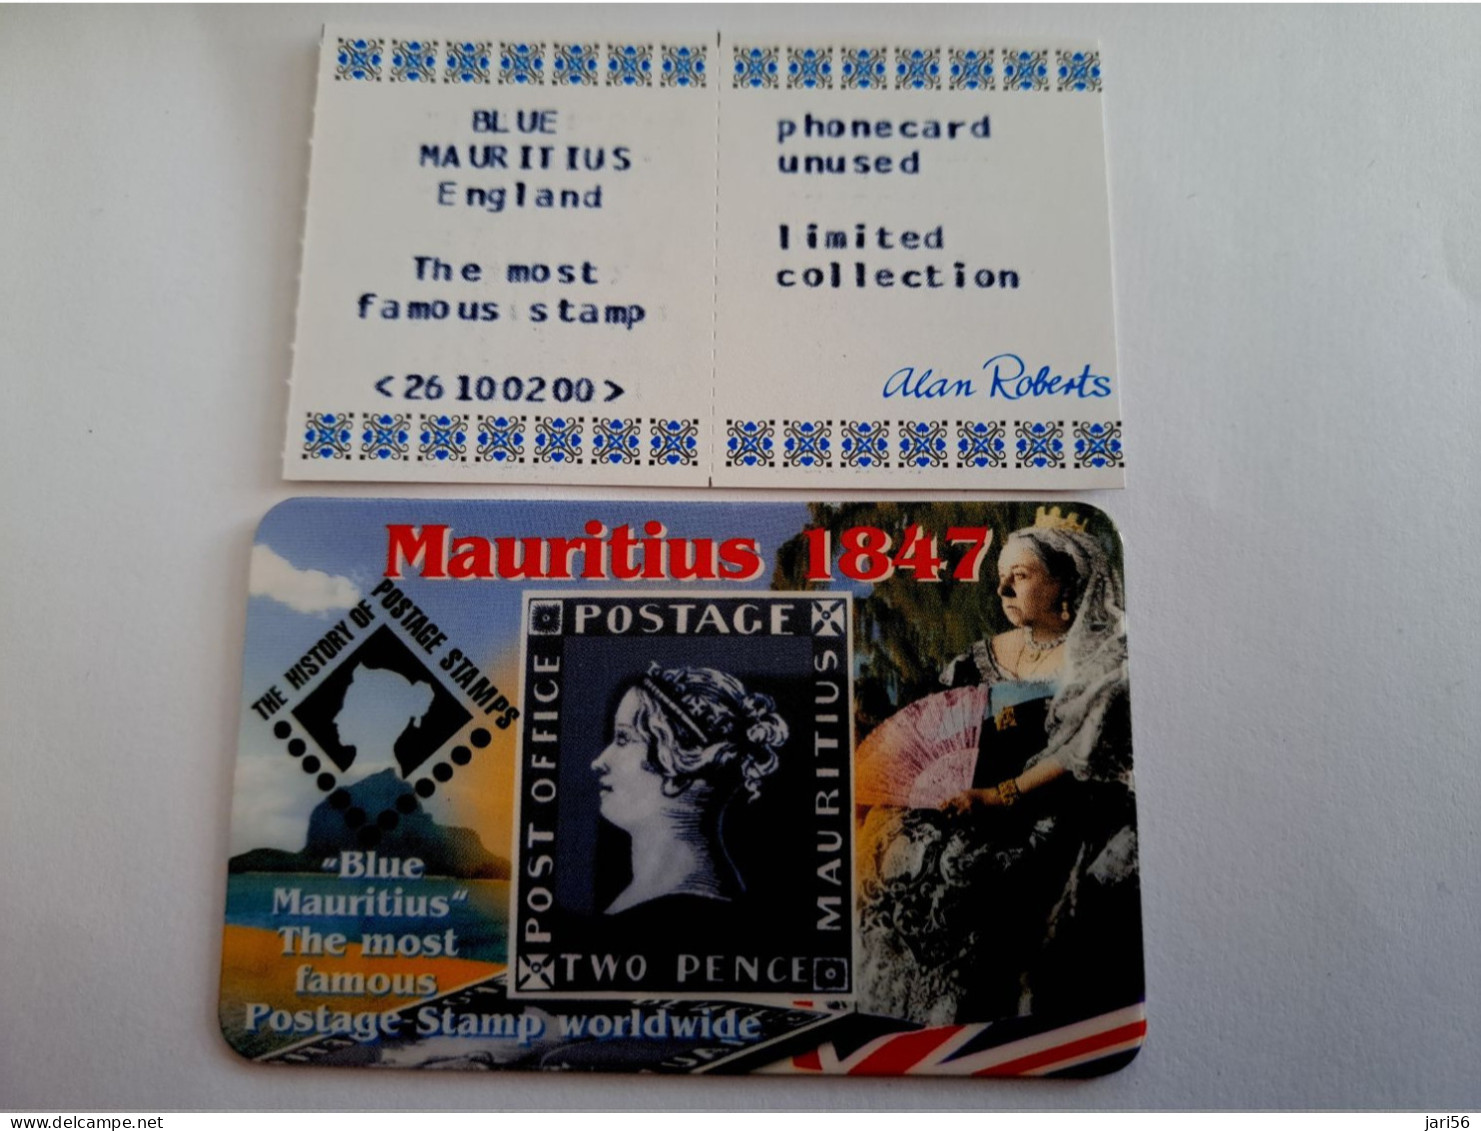 GREAT BRITAIN /20 UNITS / MAURITIUS   1847 / DATE 09/99     /    PREPAID CARD / LIMITED EDITION/ MINT  **15705** - Collections